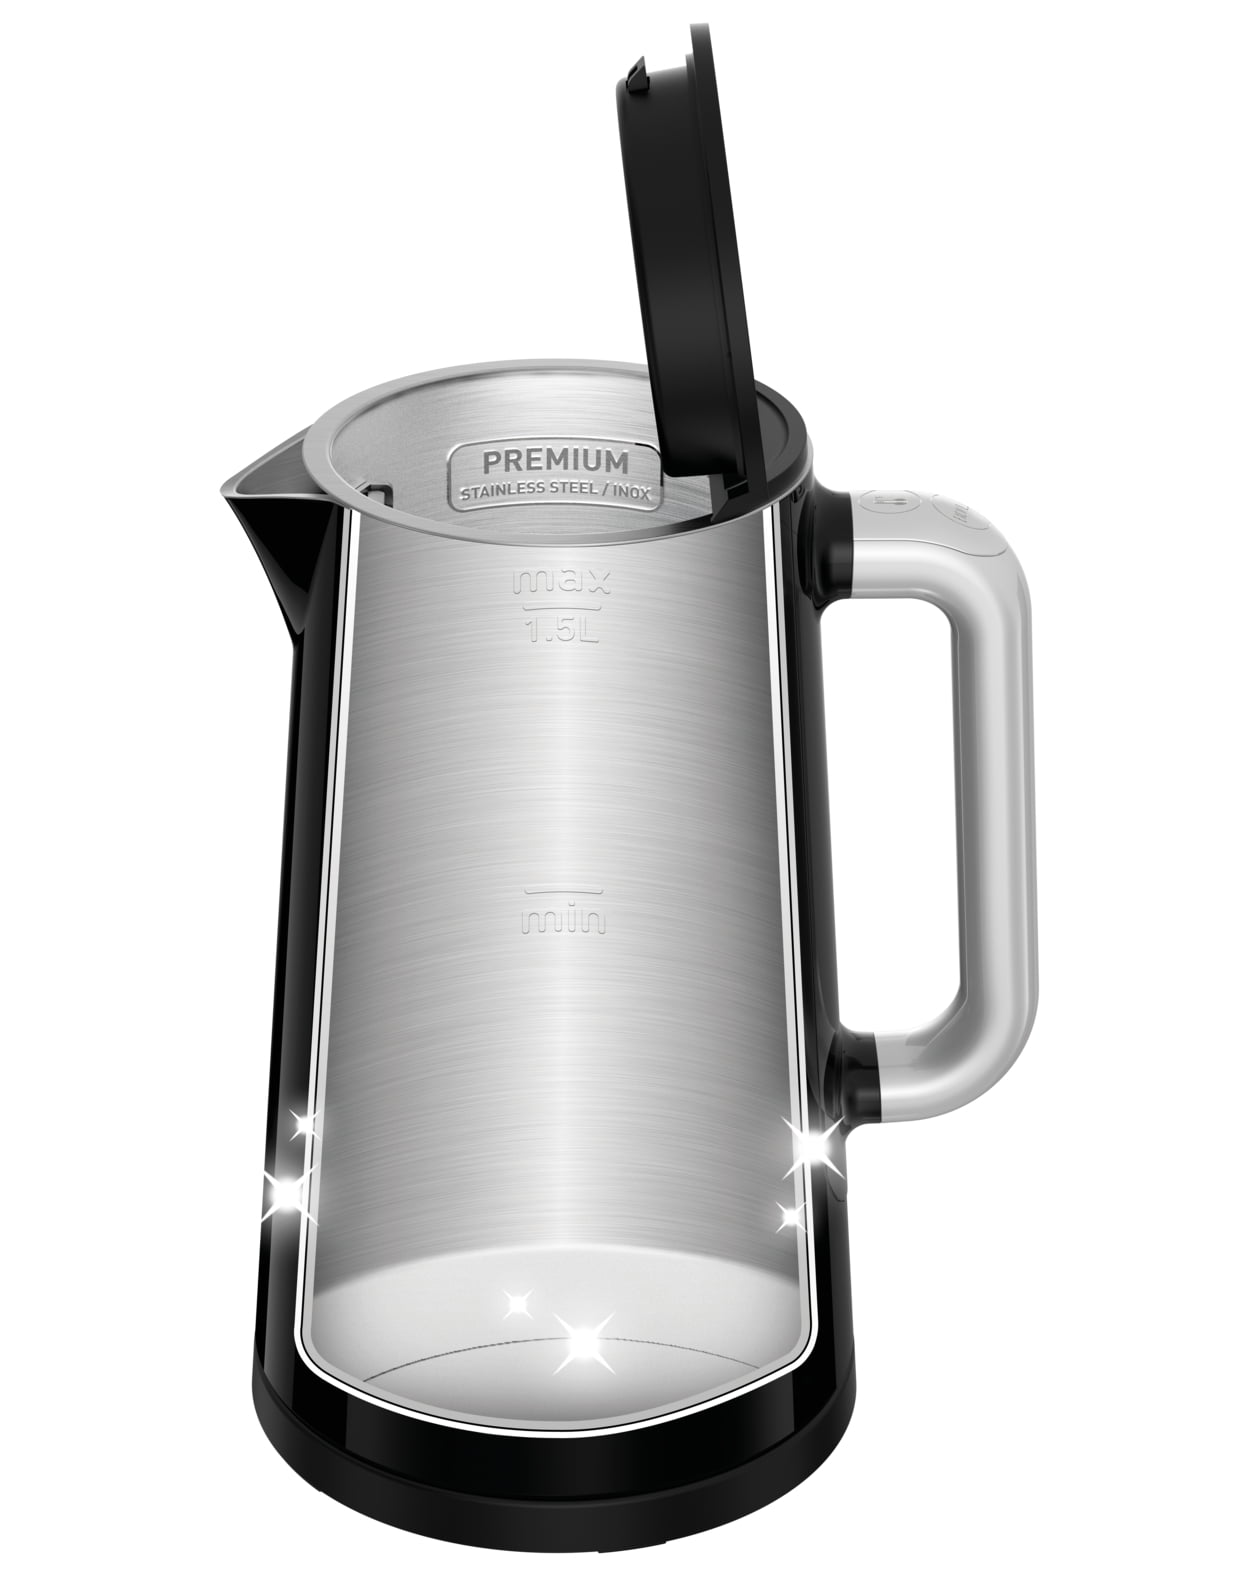 KRUPS BW3990 Prelude Electric Kettle with Light Water Level Indicator and  Stainless Steel Housing, Silver